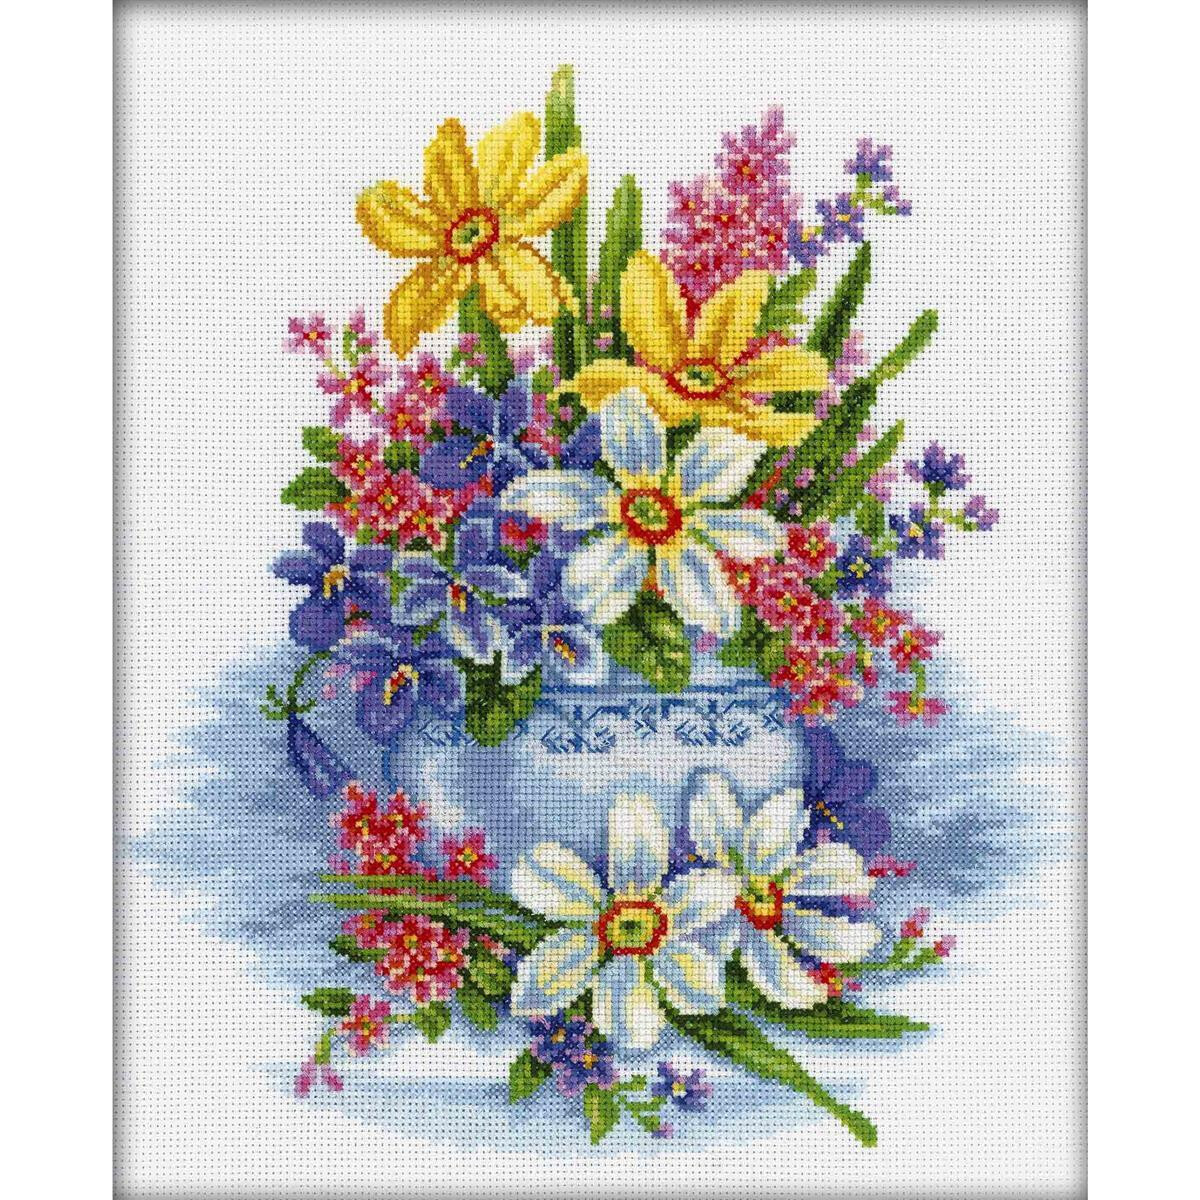 RTO counted Cross Stitch Kit "Tender Flowers"...